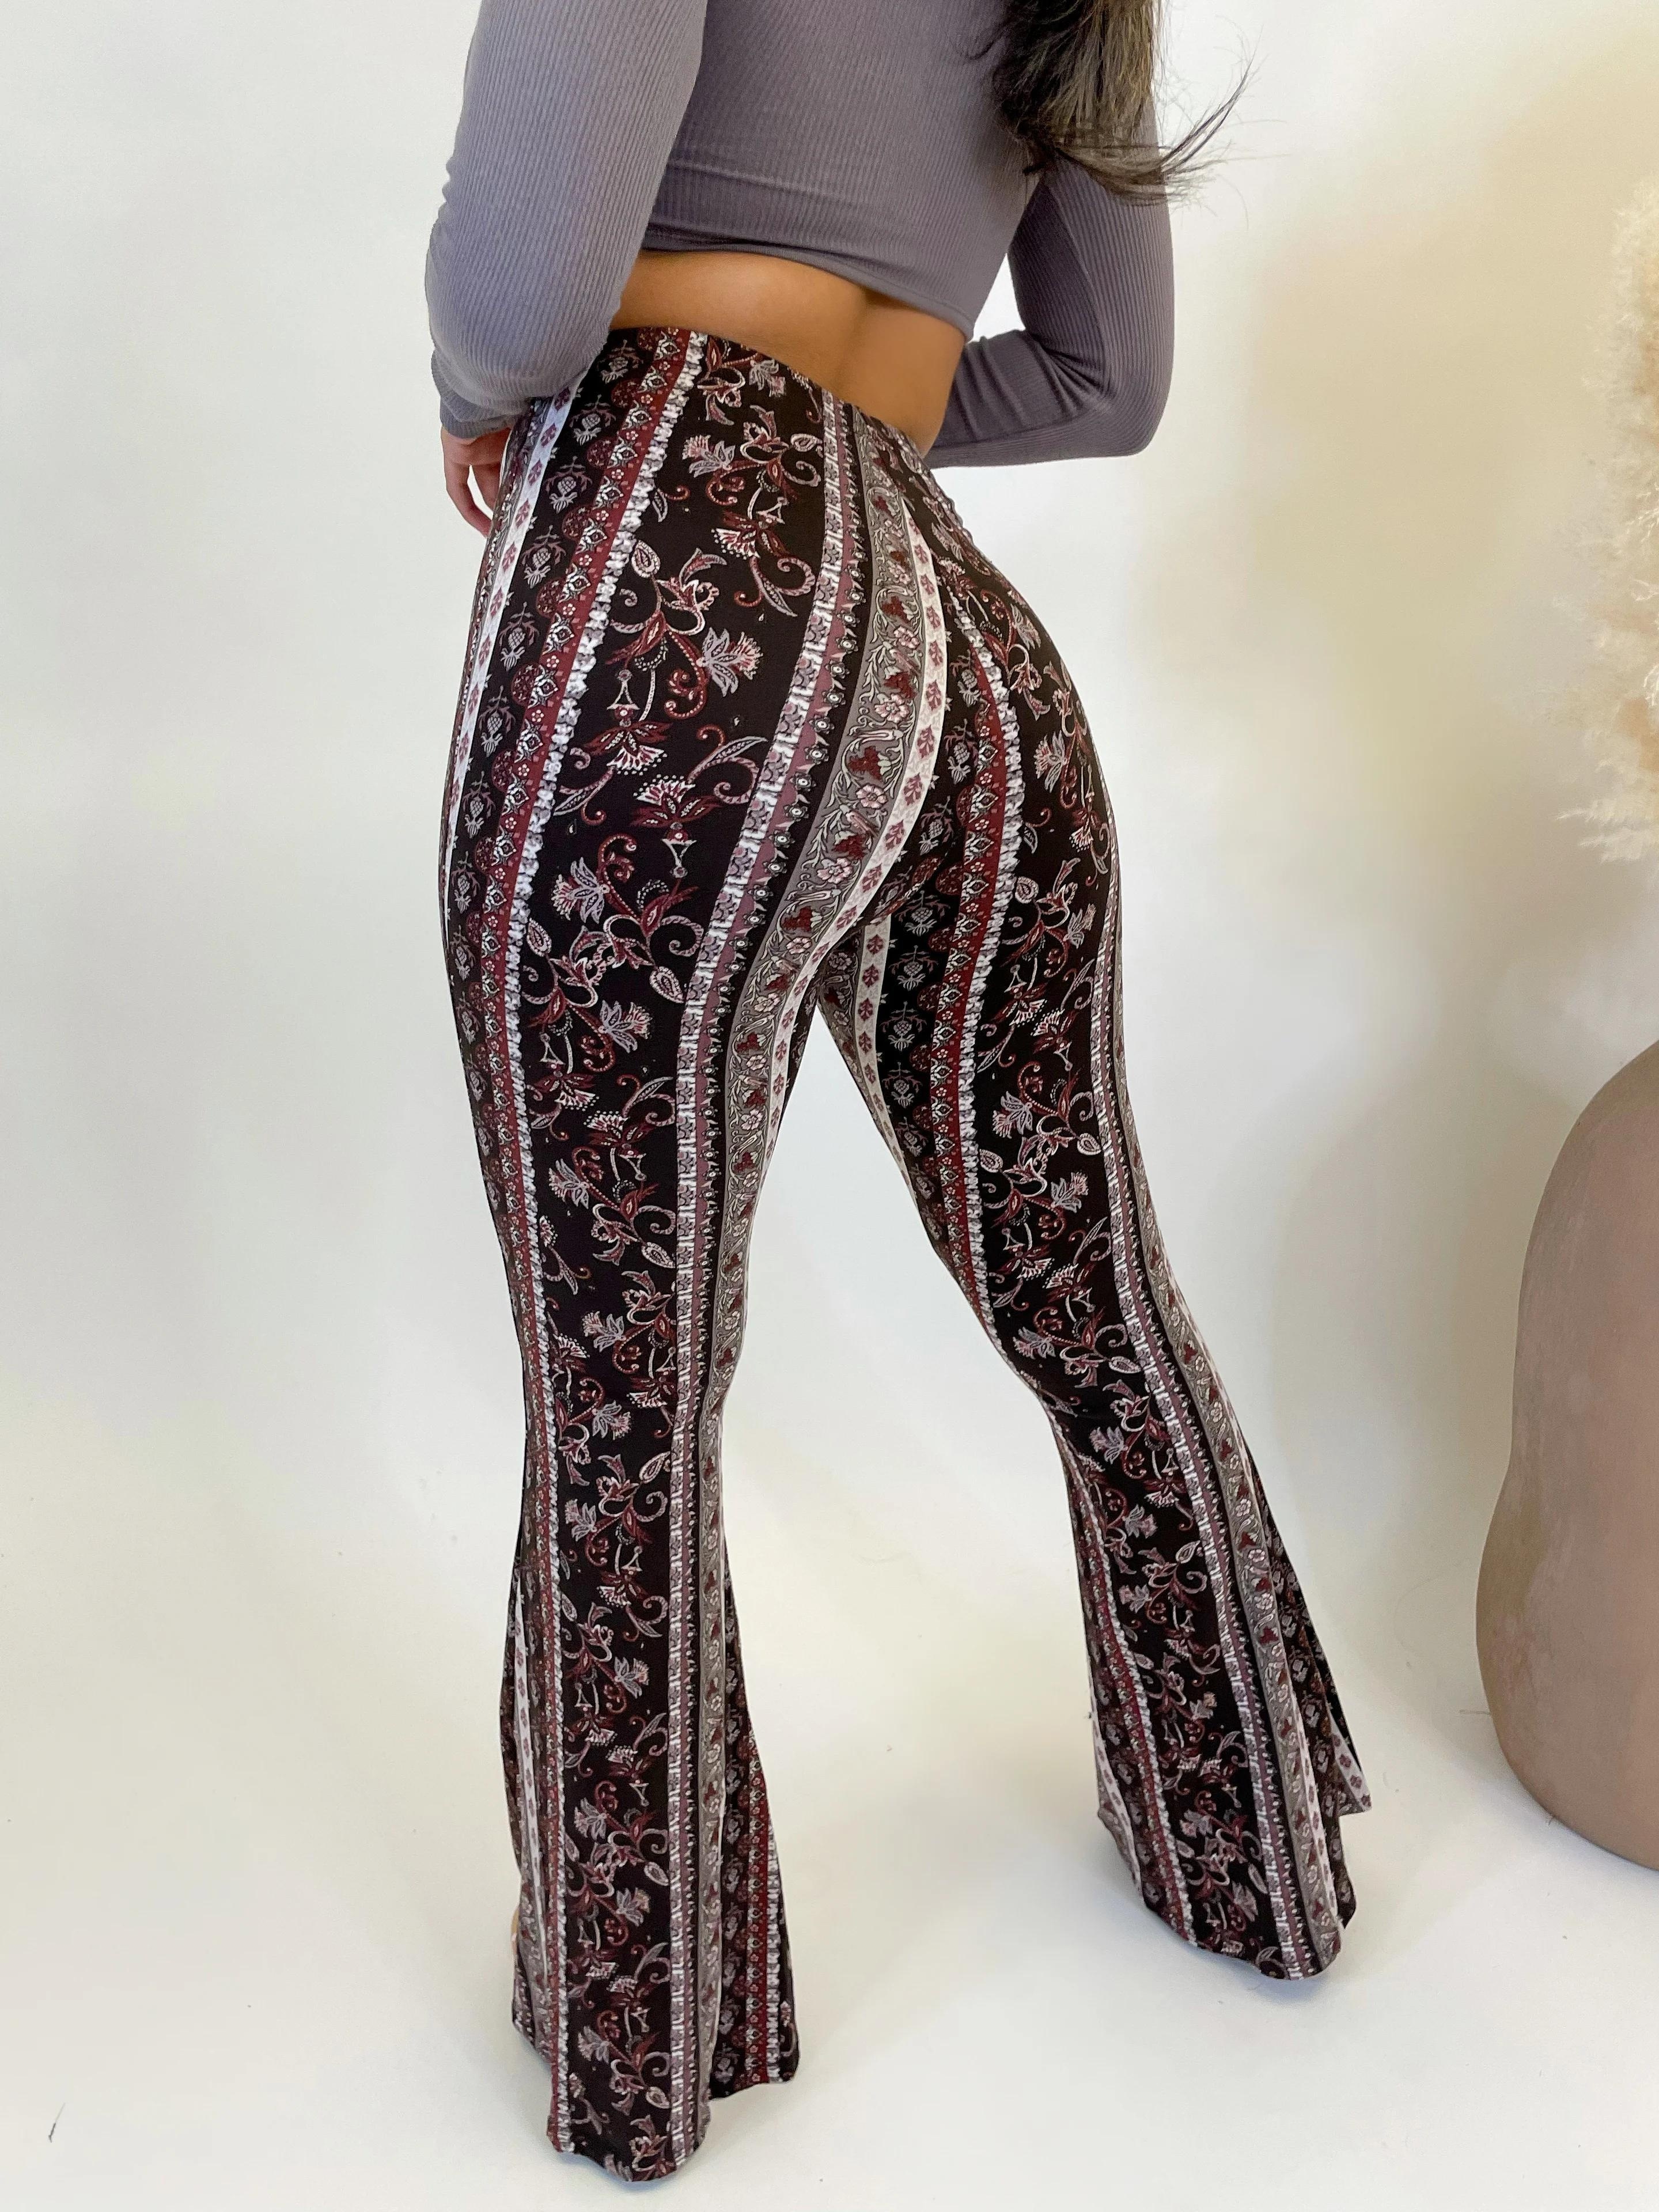 Women Floral Print Bell Bottom Pants Stretchy High Waist Flared Leggings  Casual Long Pants Summer Fall Trousers 